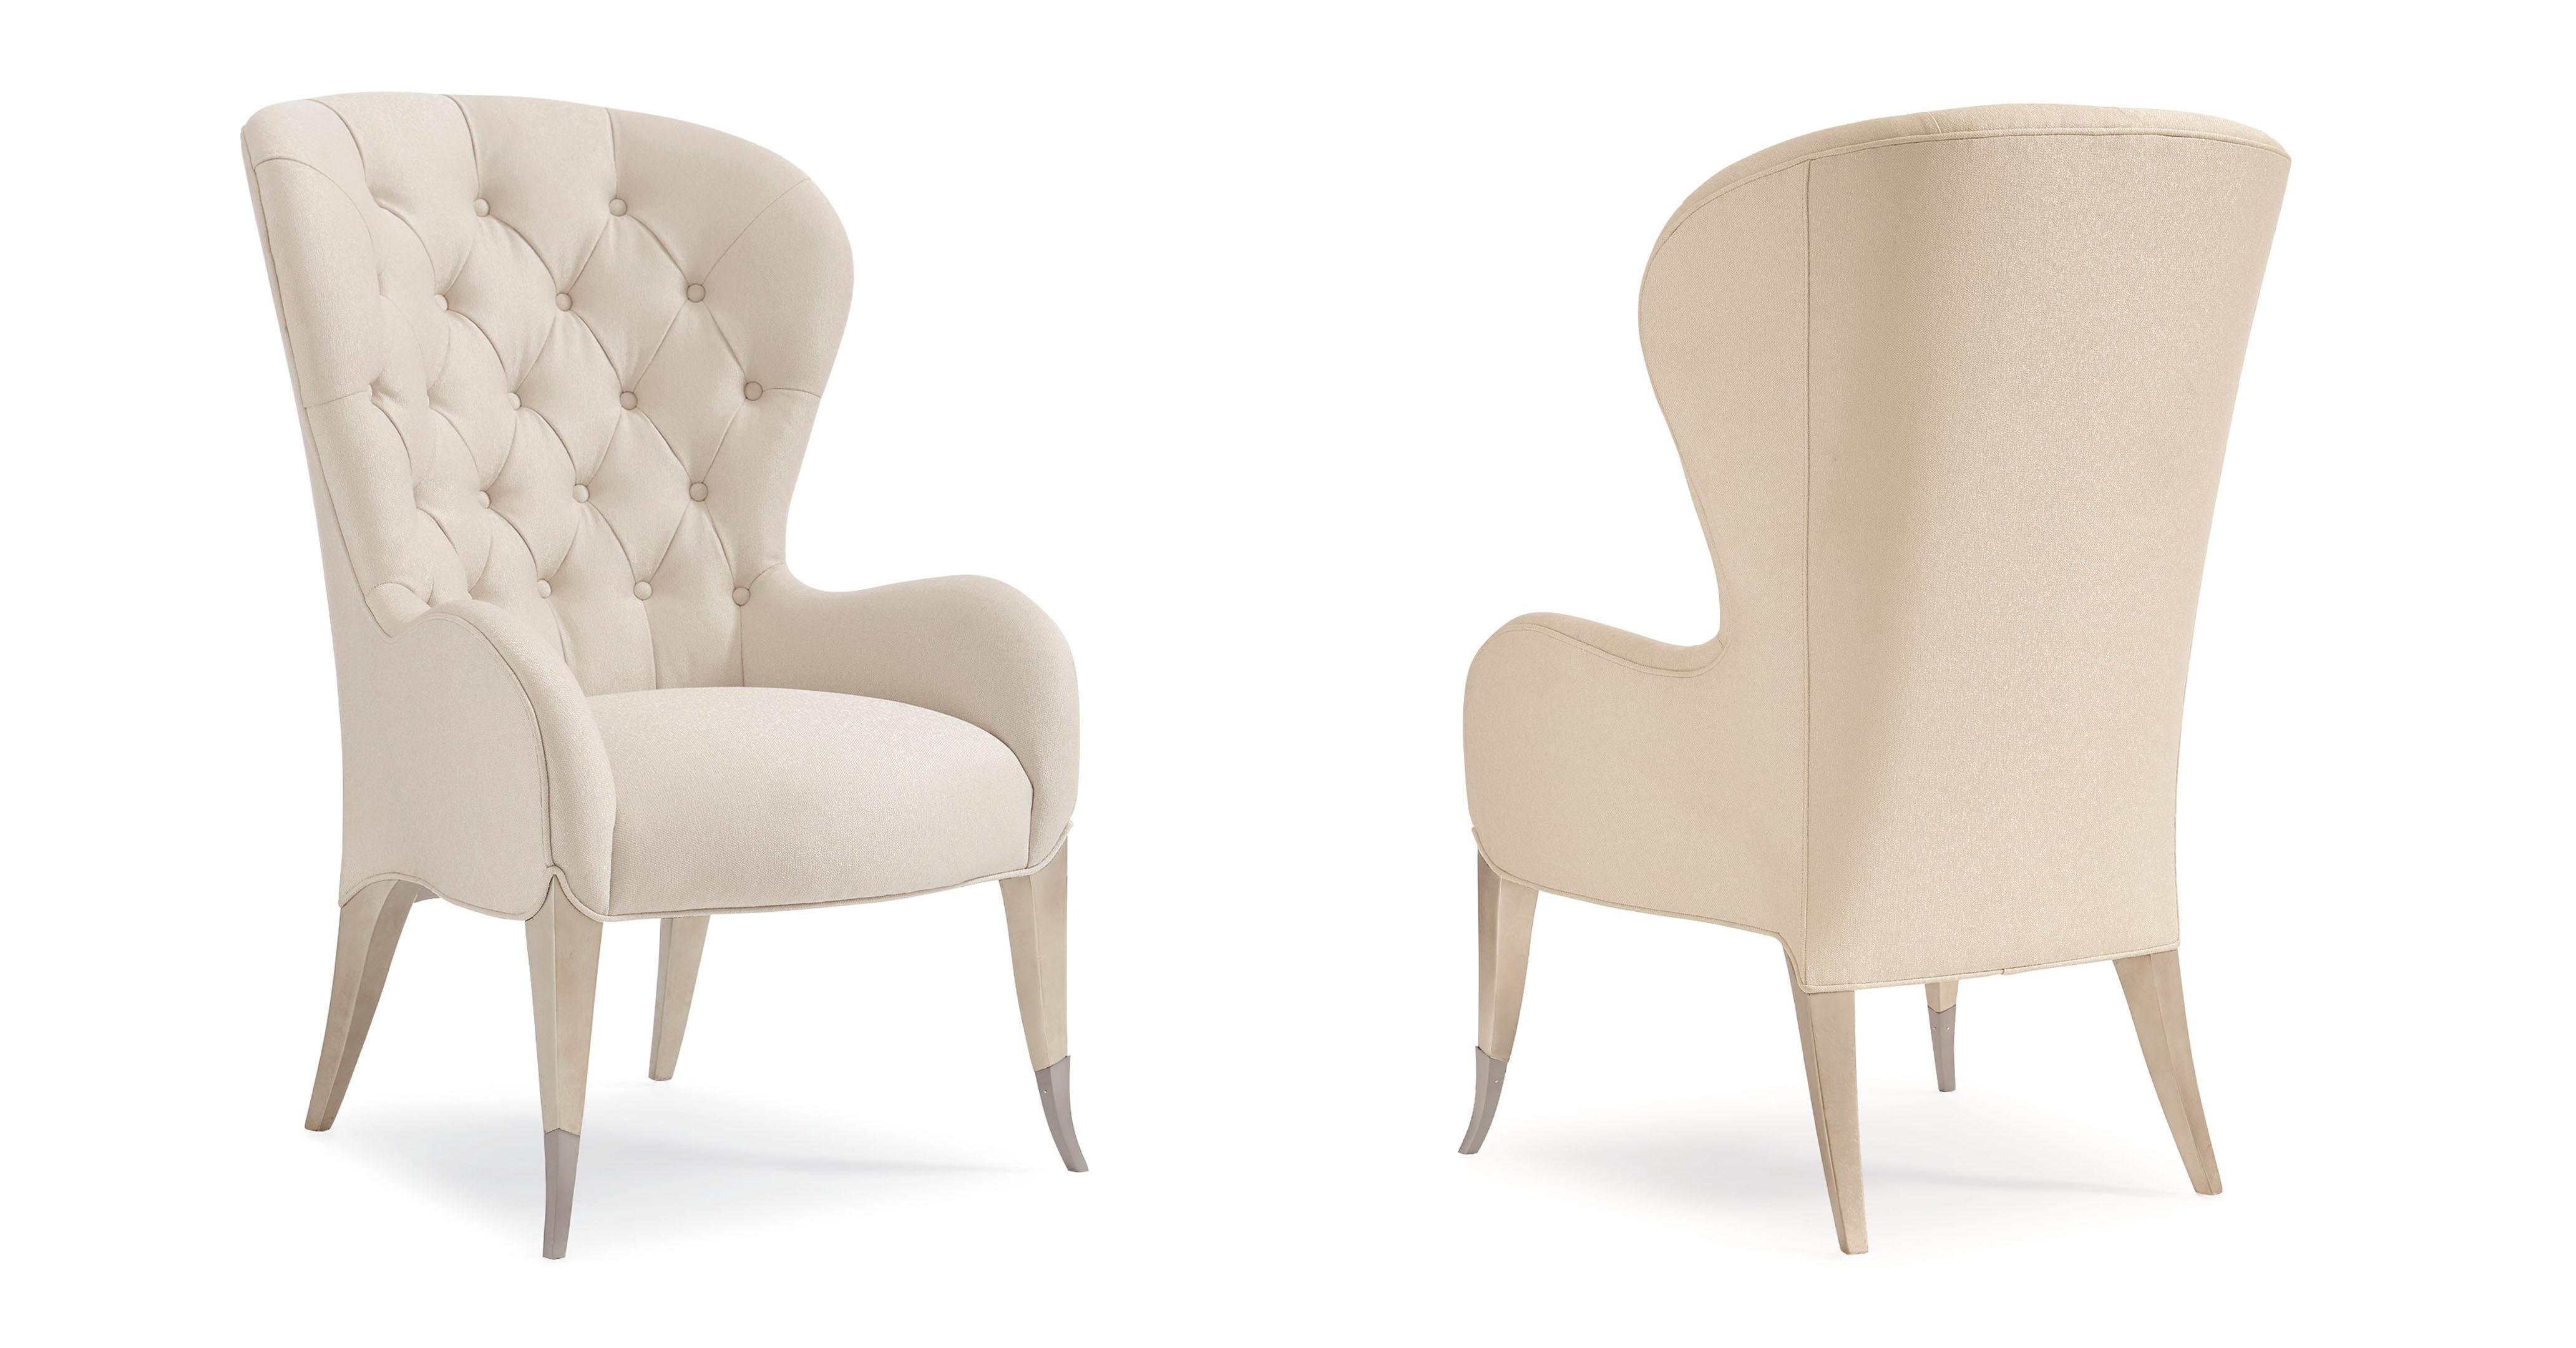 

    
Cream Finish Tufted Accent Chairs Set 2Pcs INSIDE STORY by Caracole
